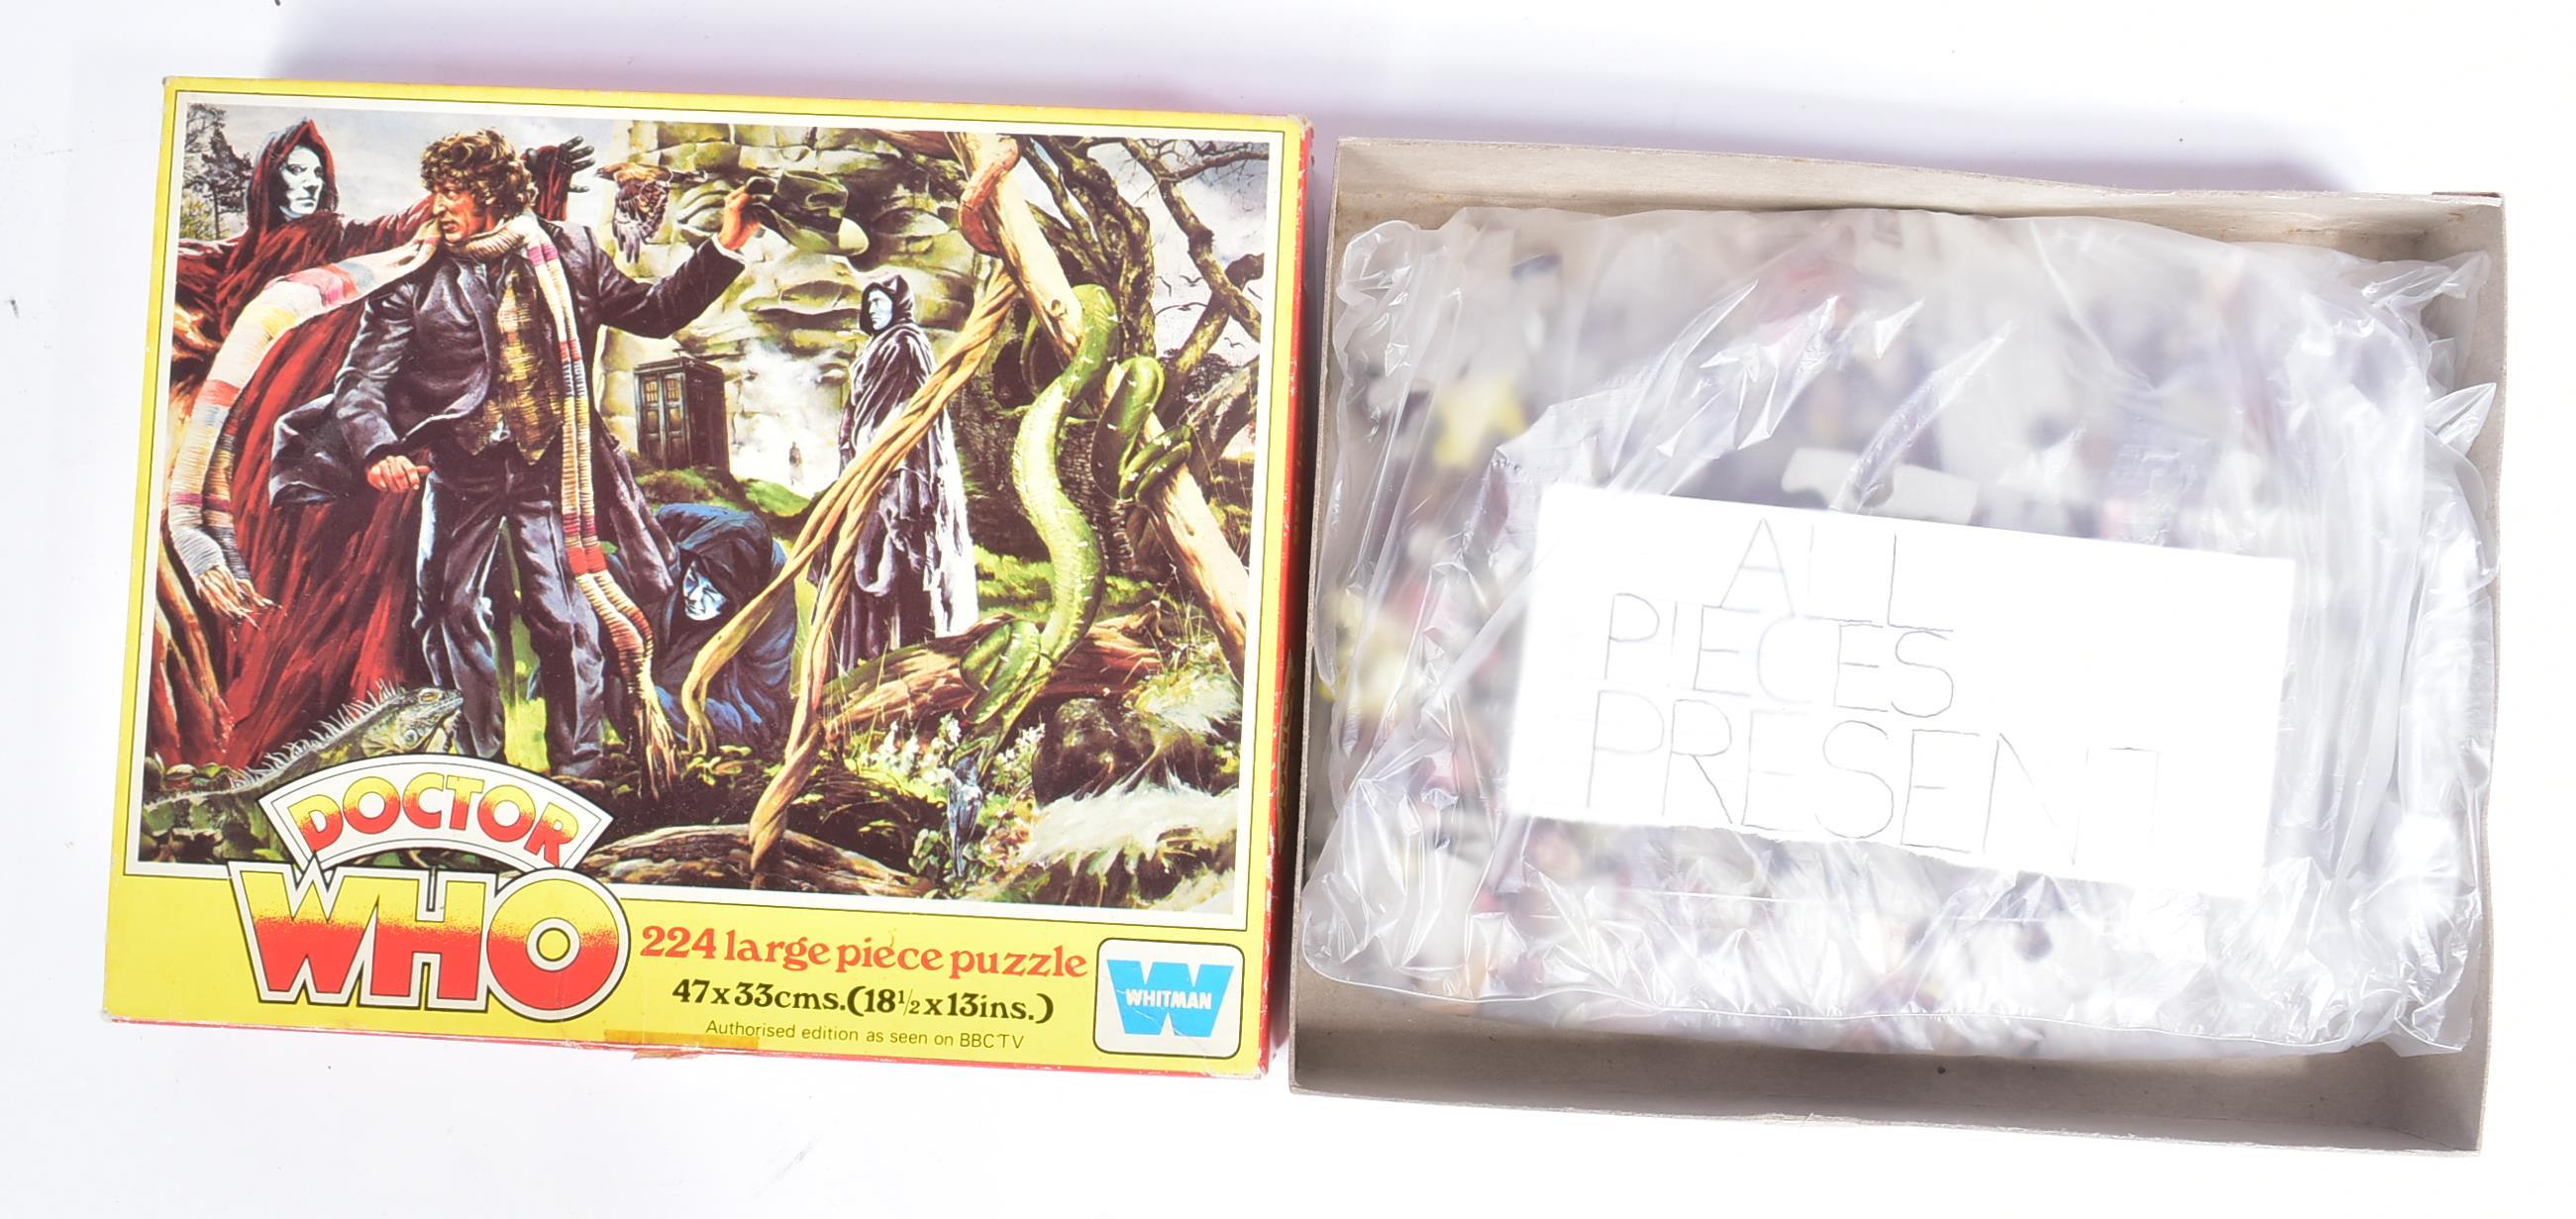 DOCTOR WHO - COLLECTION OF VINTAGE JIGSAW PUZZLES - Image 5 of 6